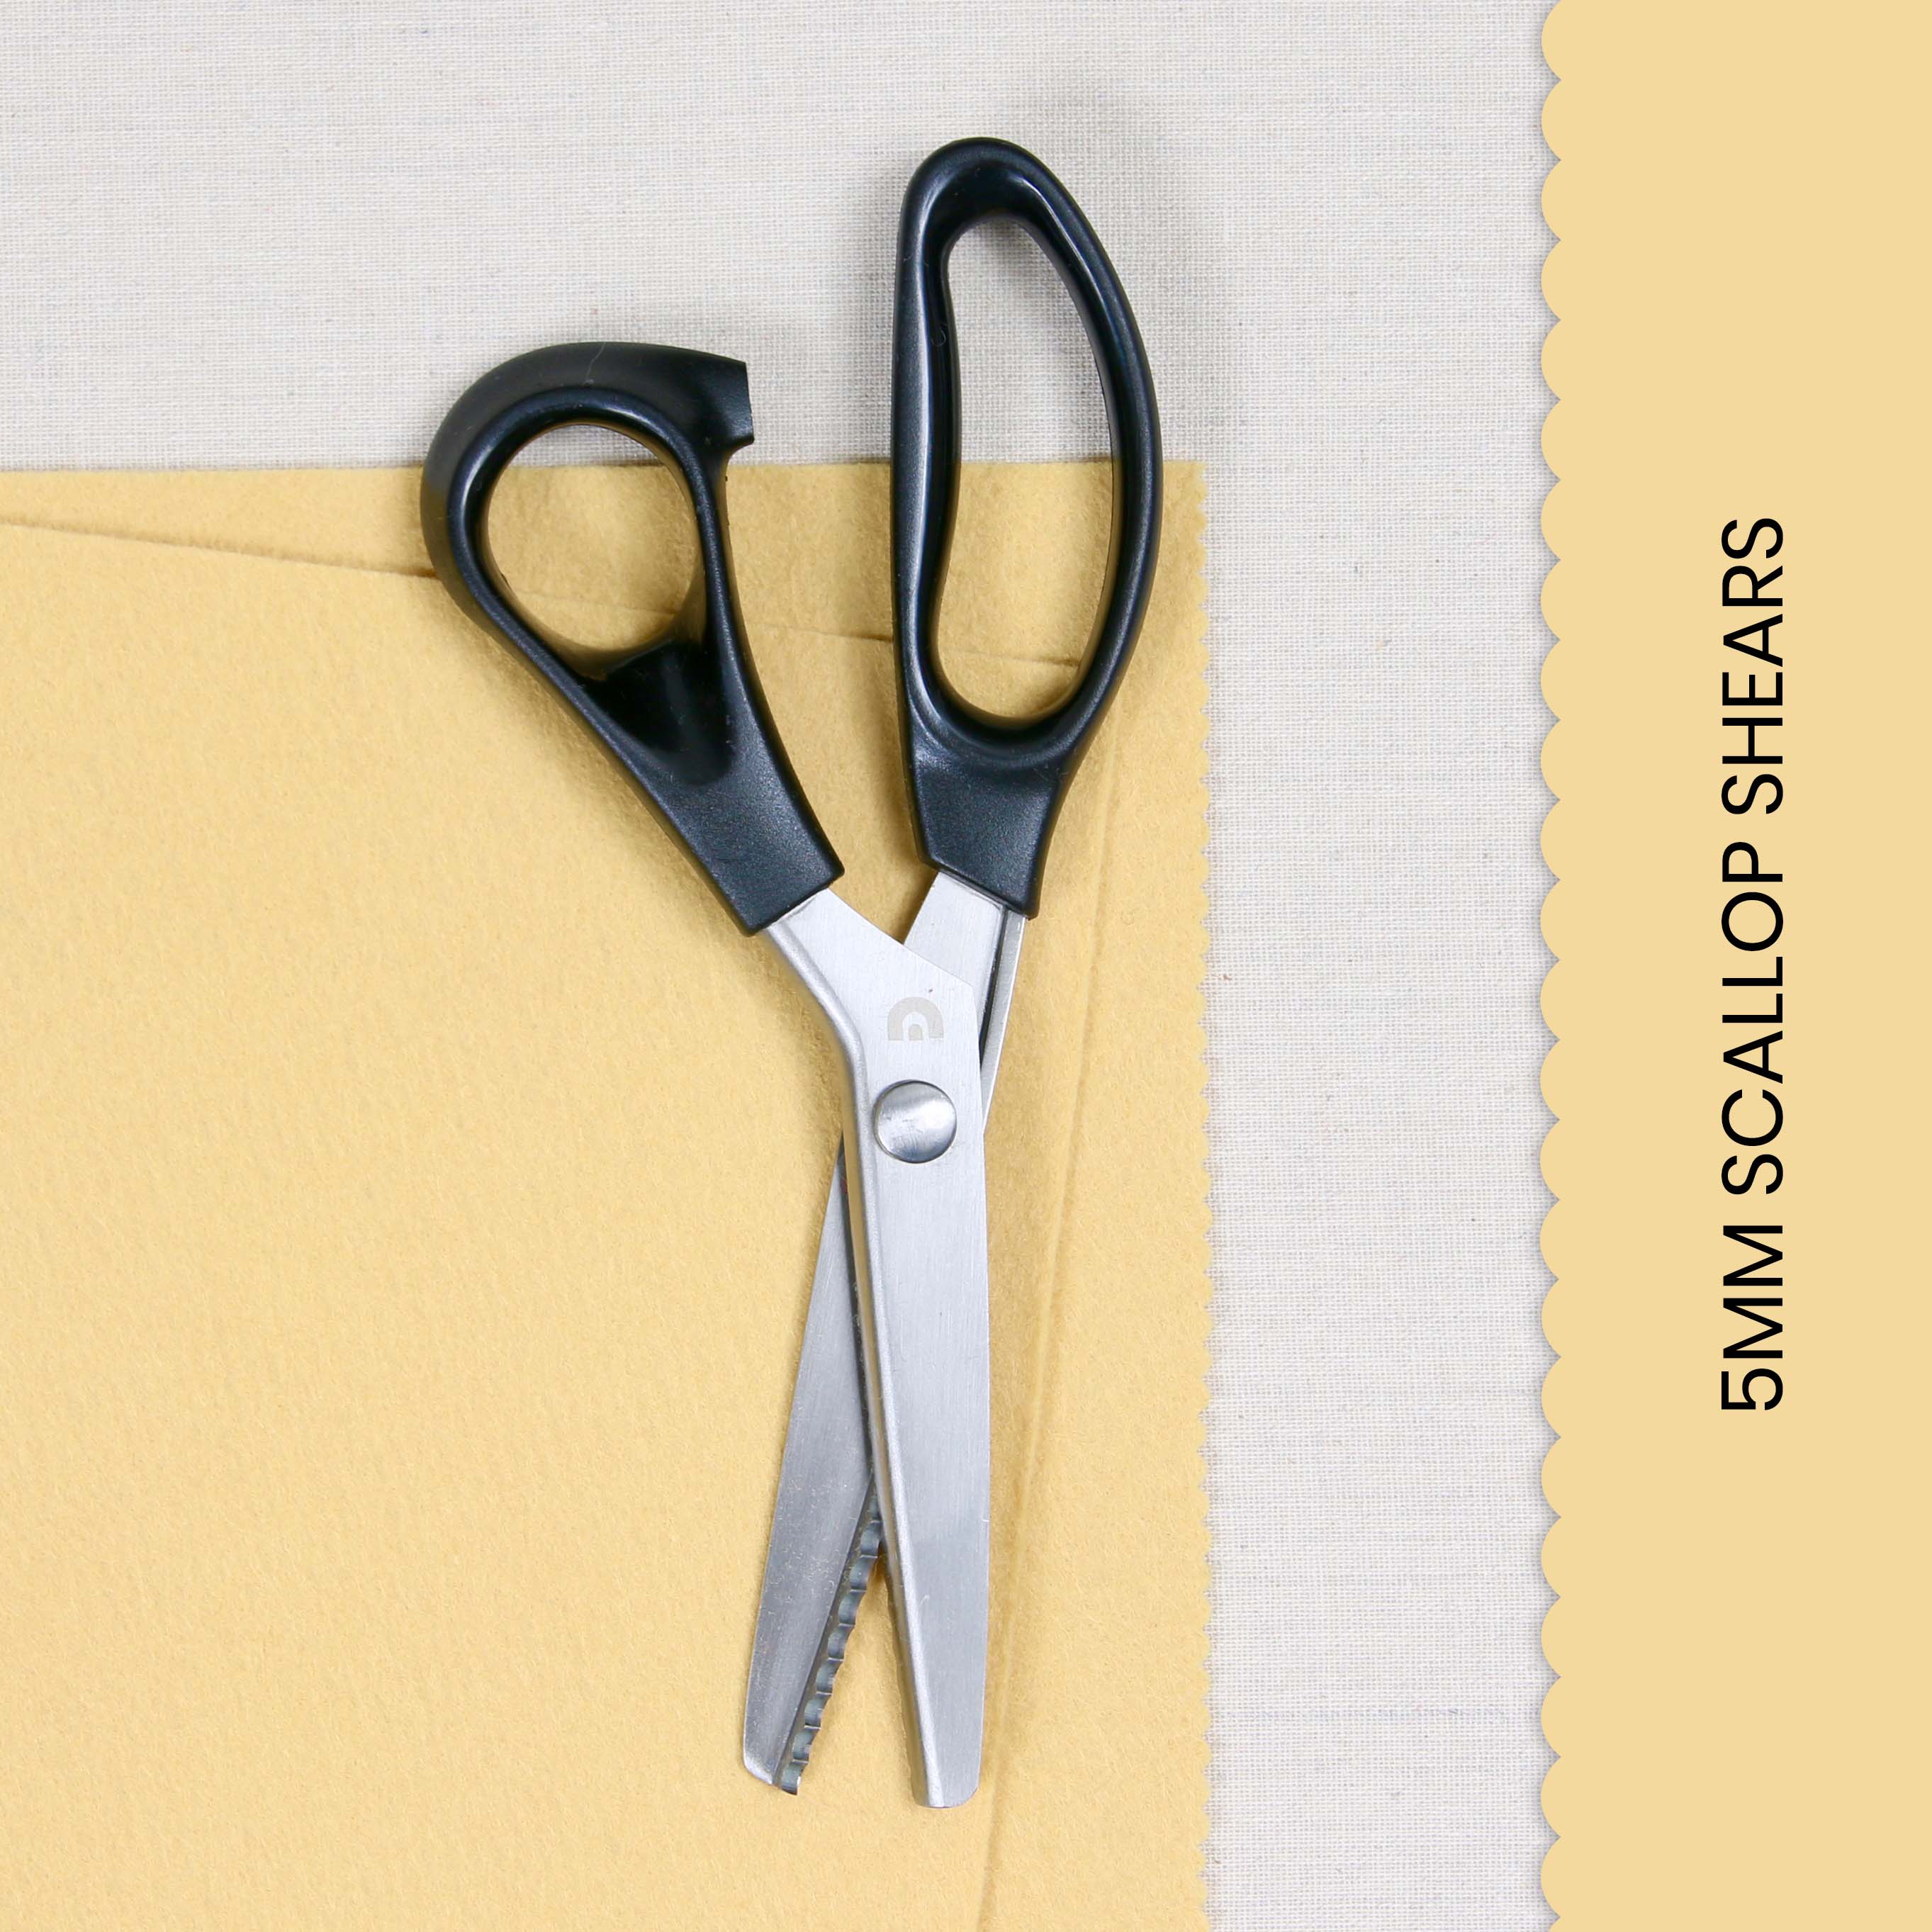 Scalloped Scissors for Cutting Lace?